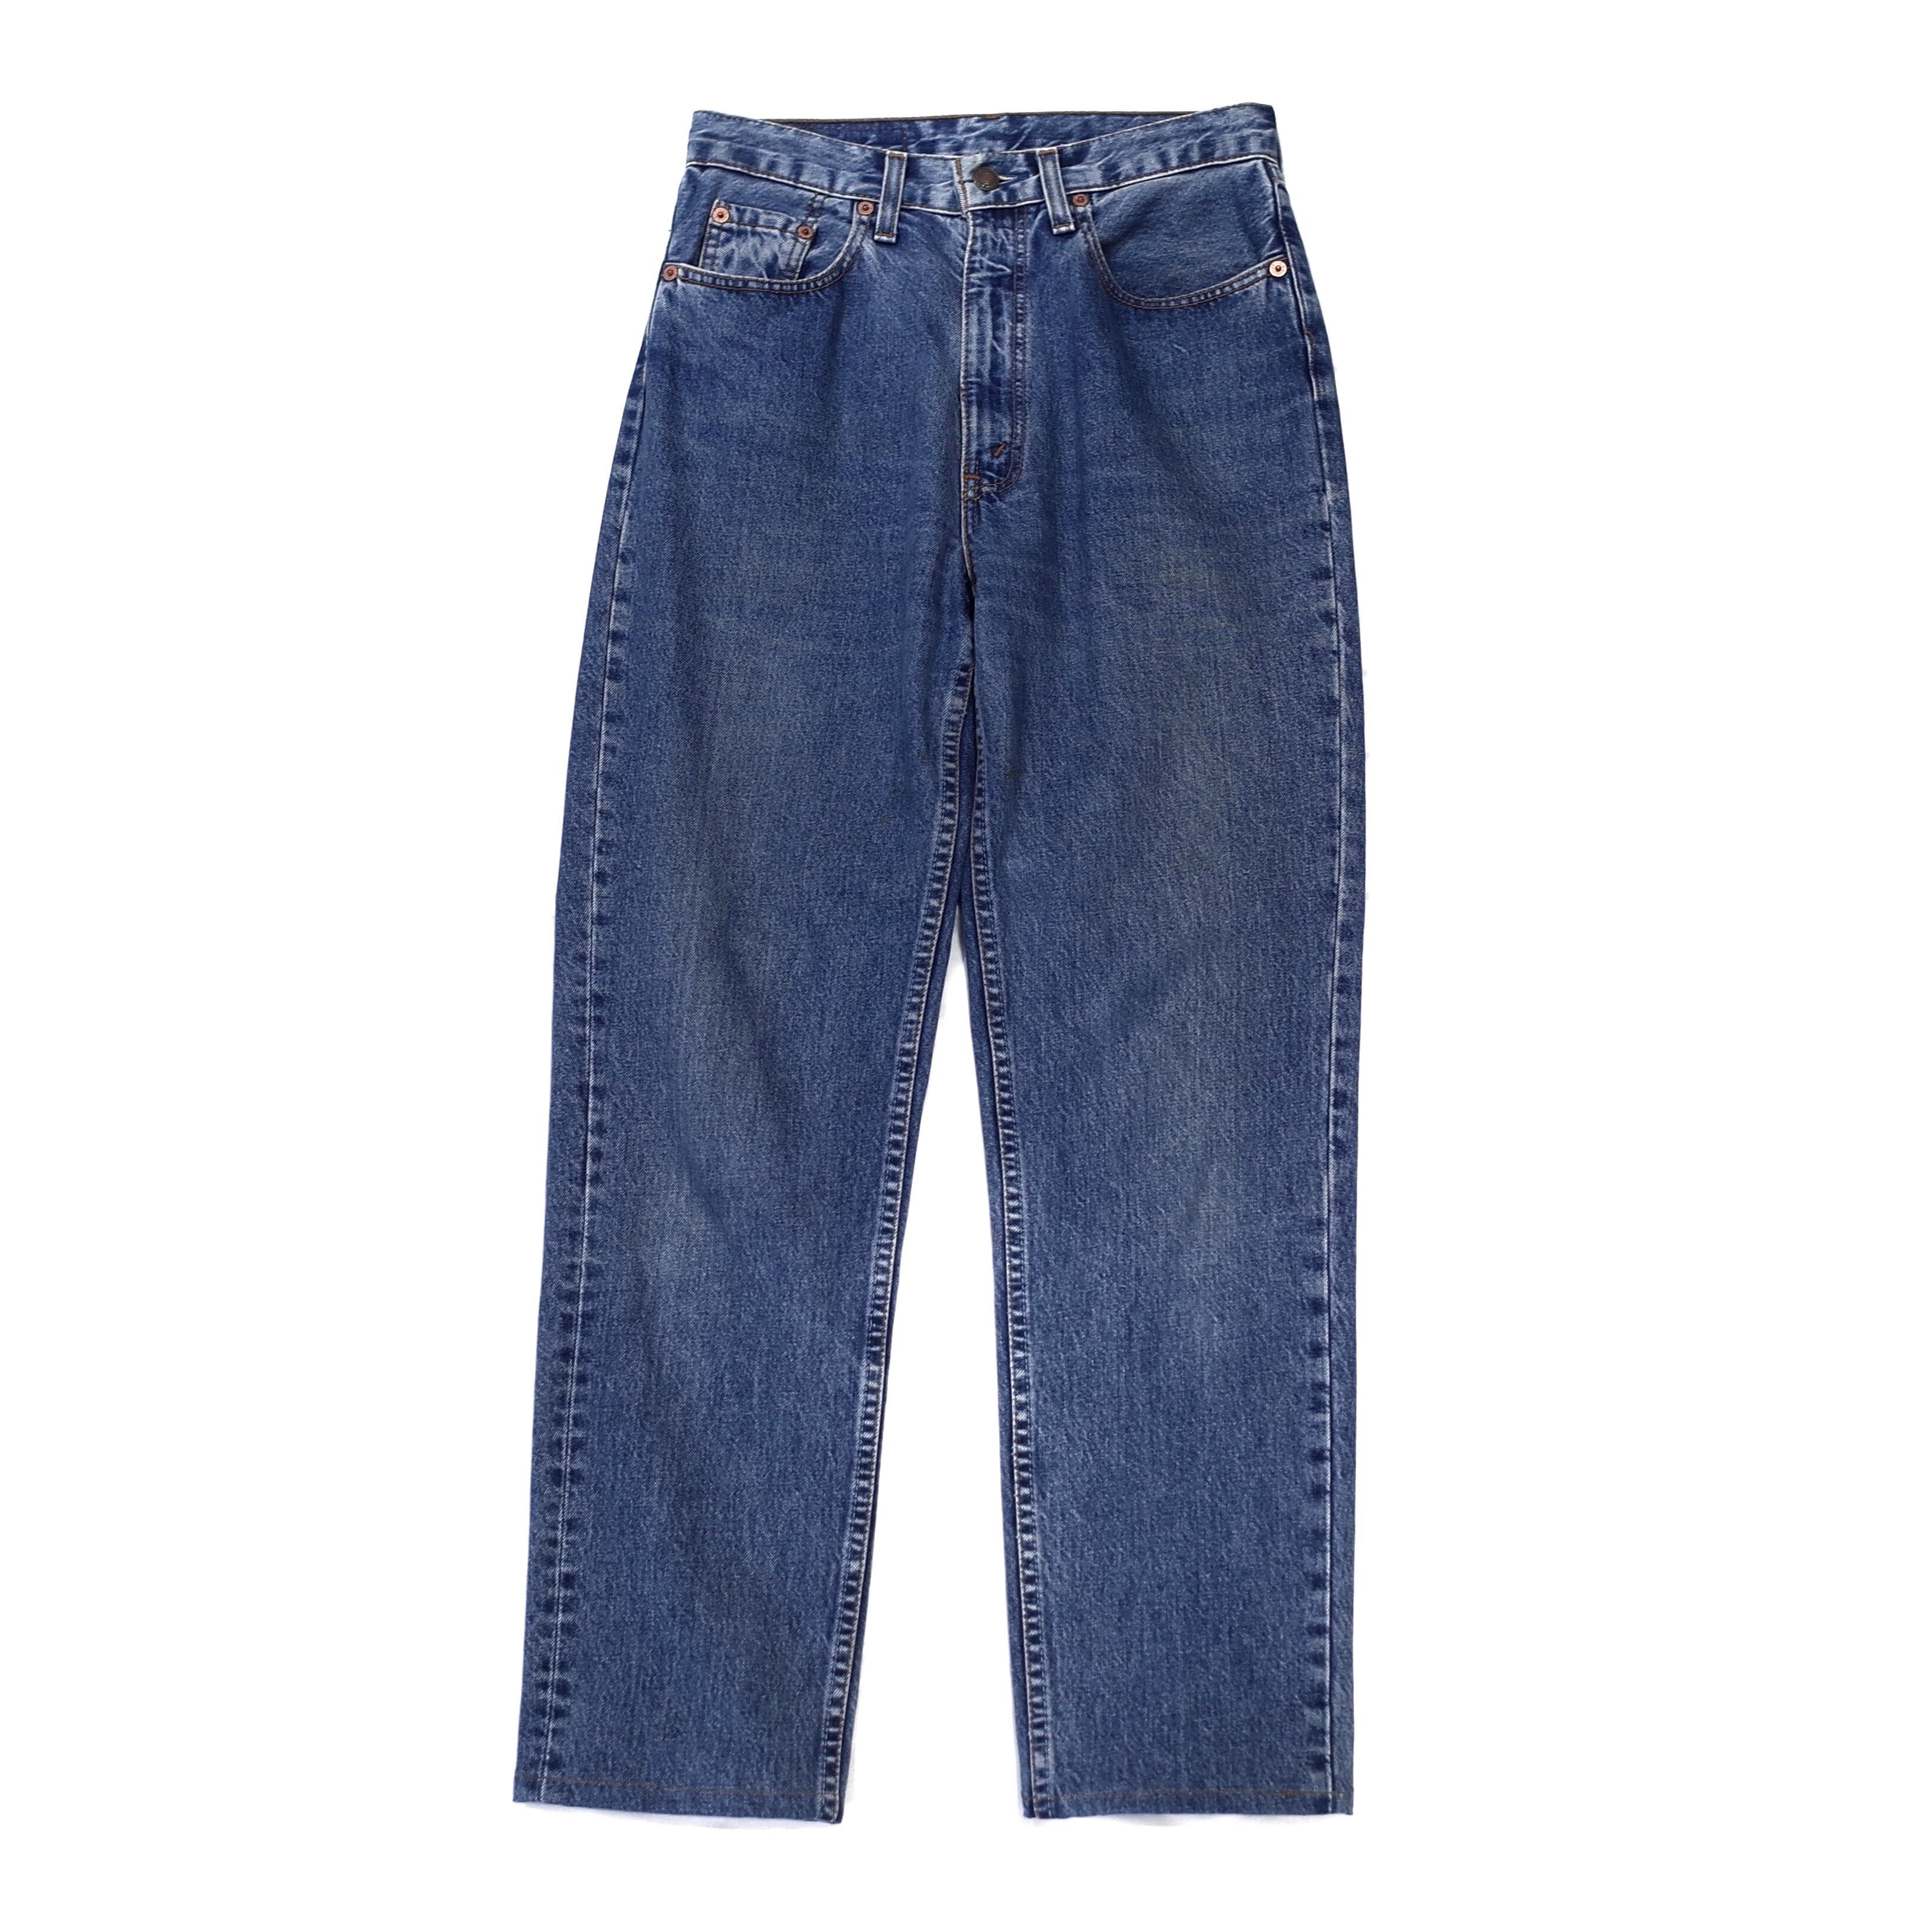 Levi's 532 Made In UK Denim Pants | FINCH vintage and archive store